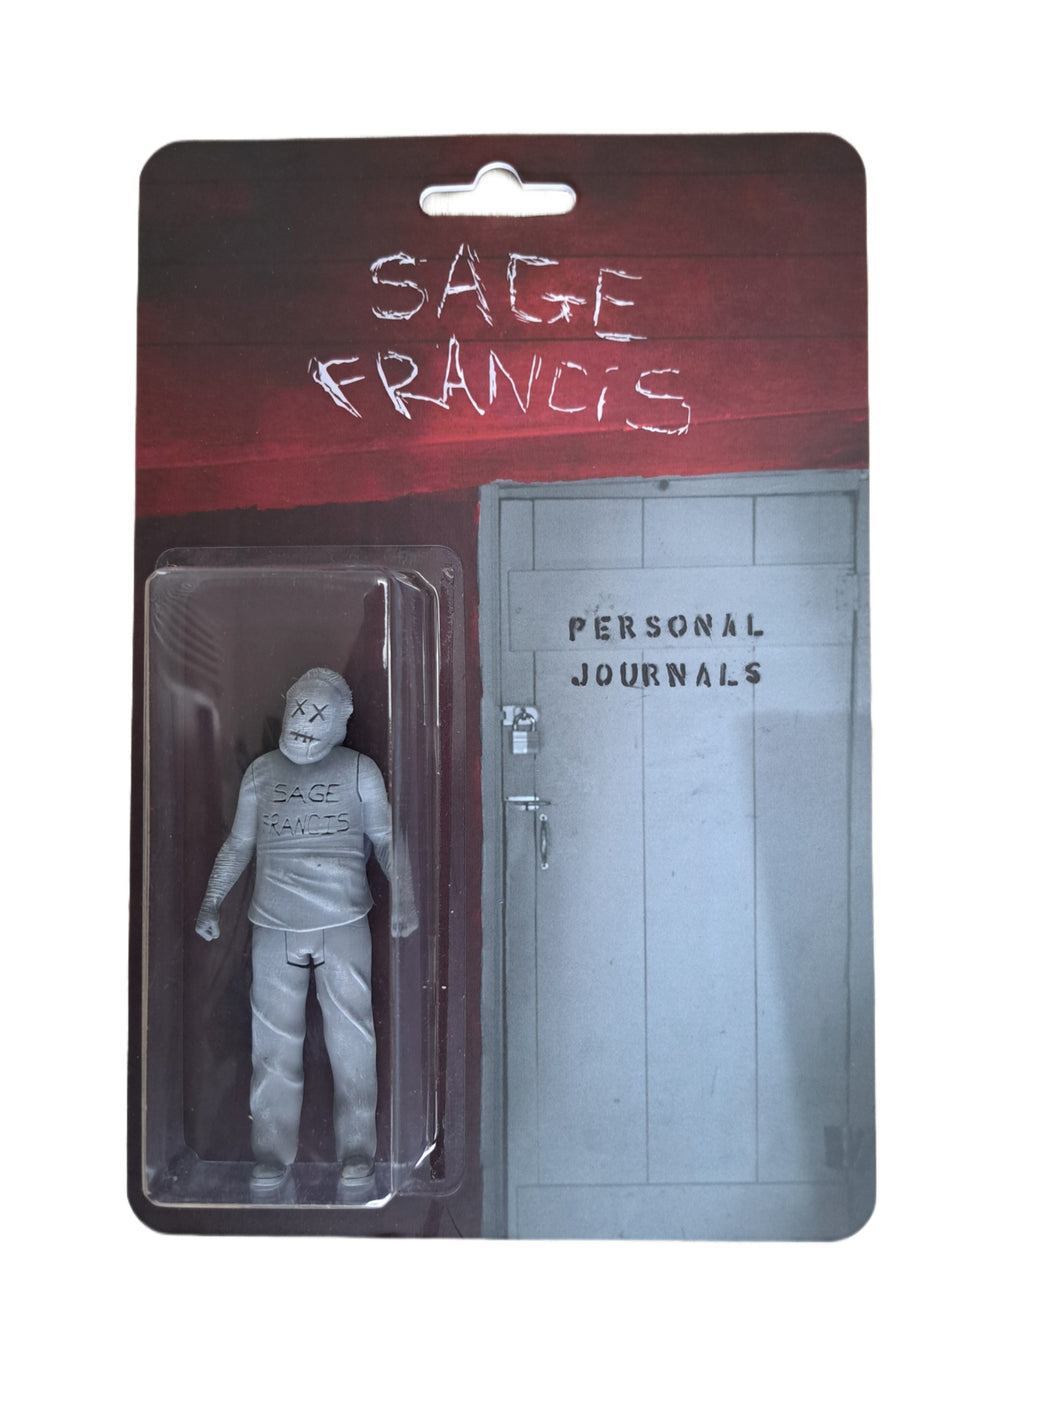 Limited Edition Personal Journals Action Figure